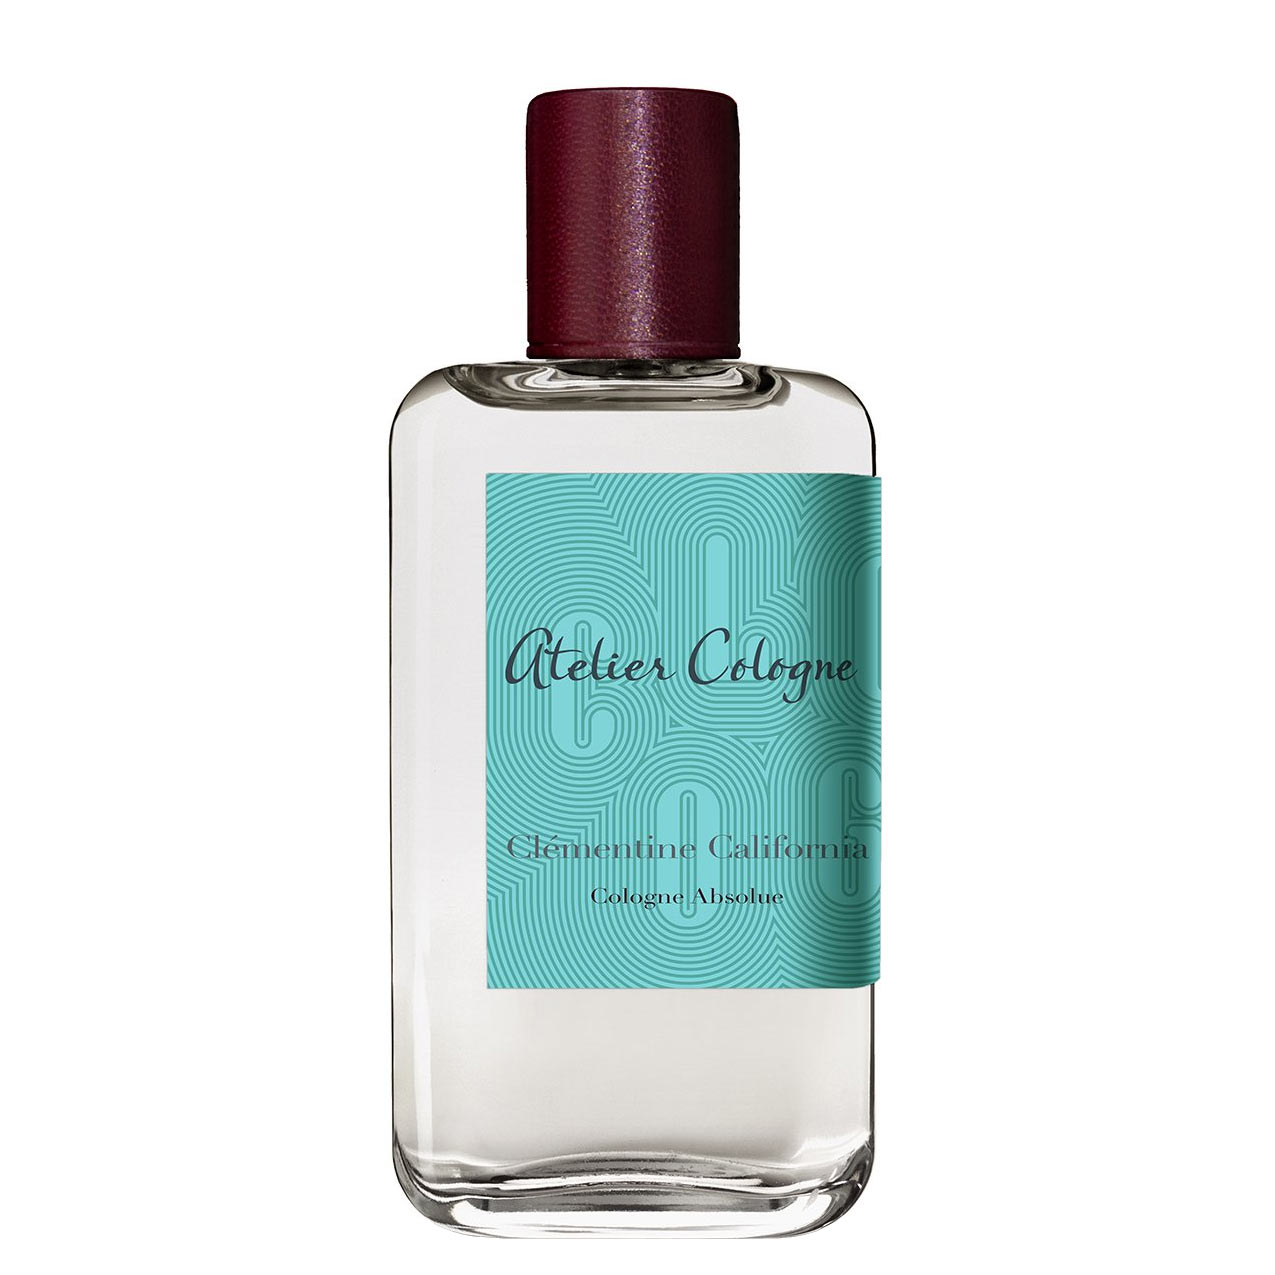 Clementine California Atelier Cologne Image